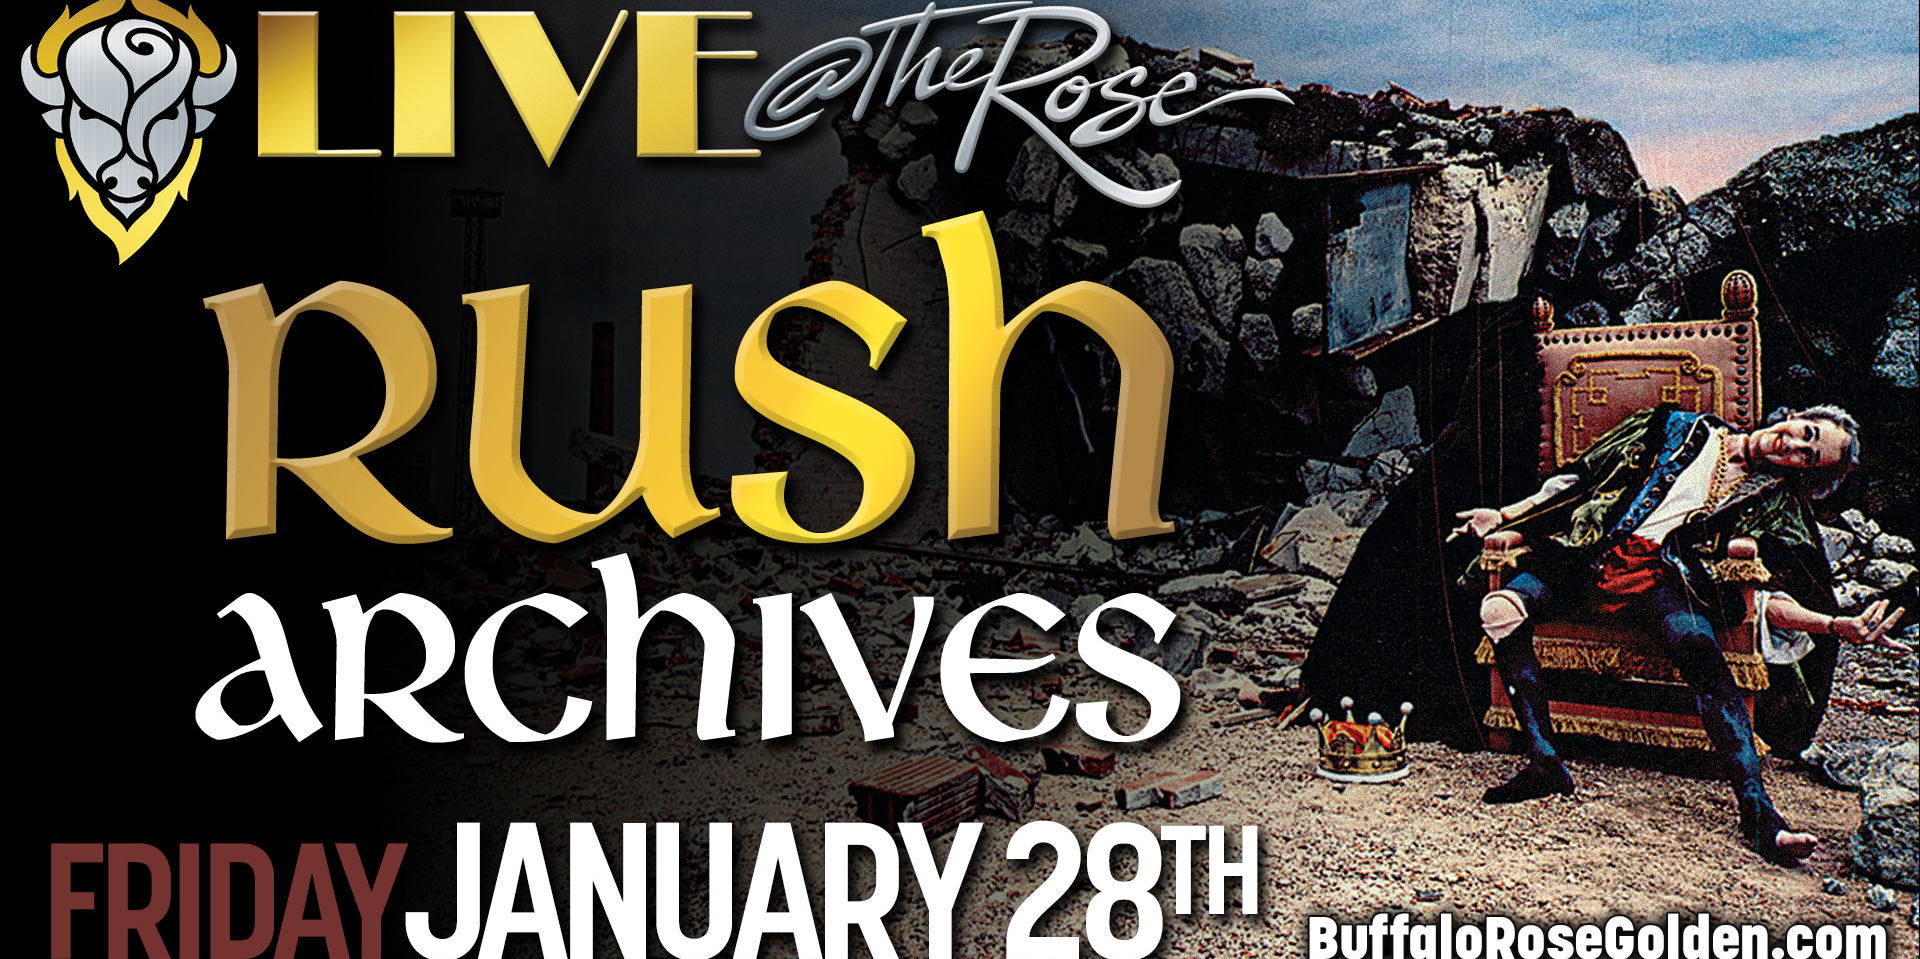 Live @ The Rose - Rush Archives promotional image